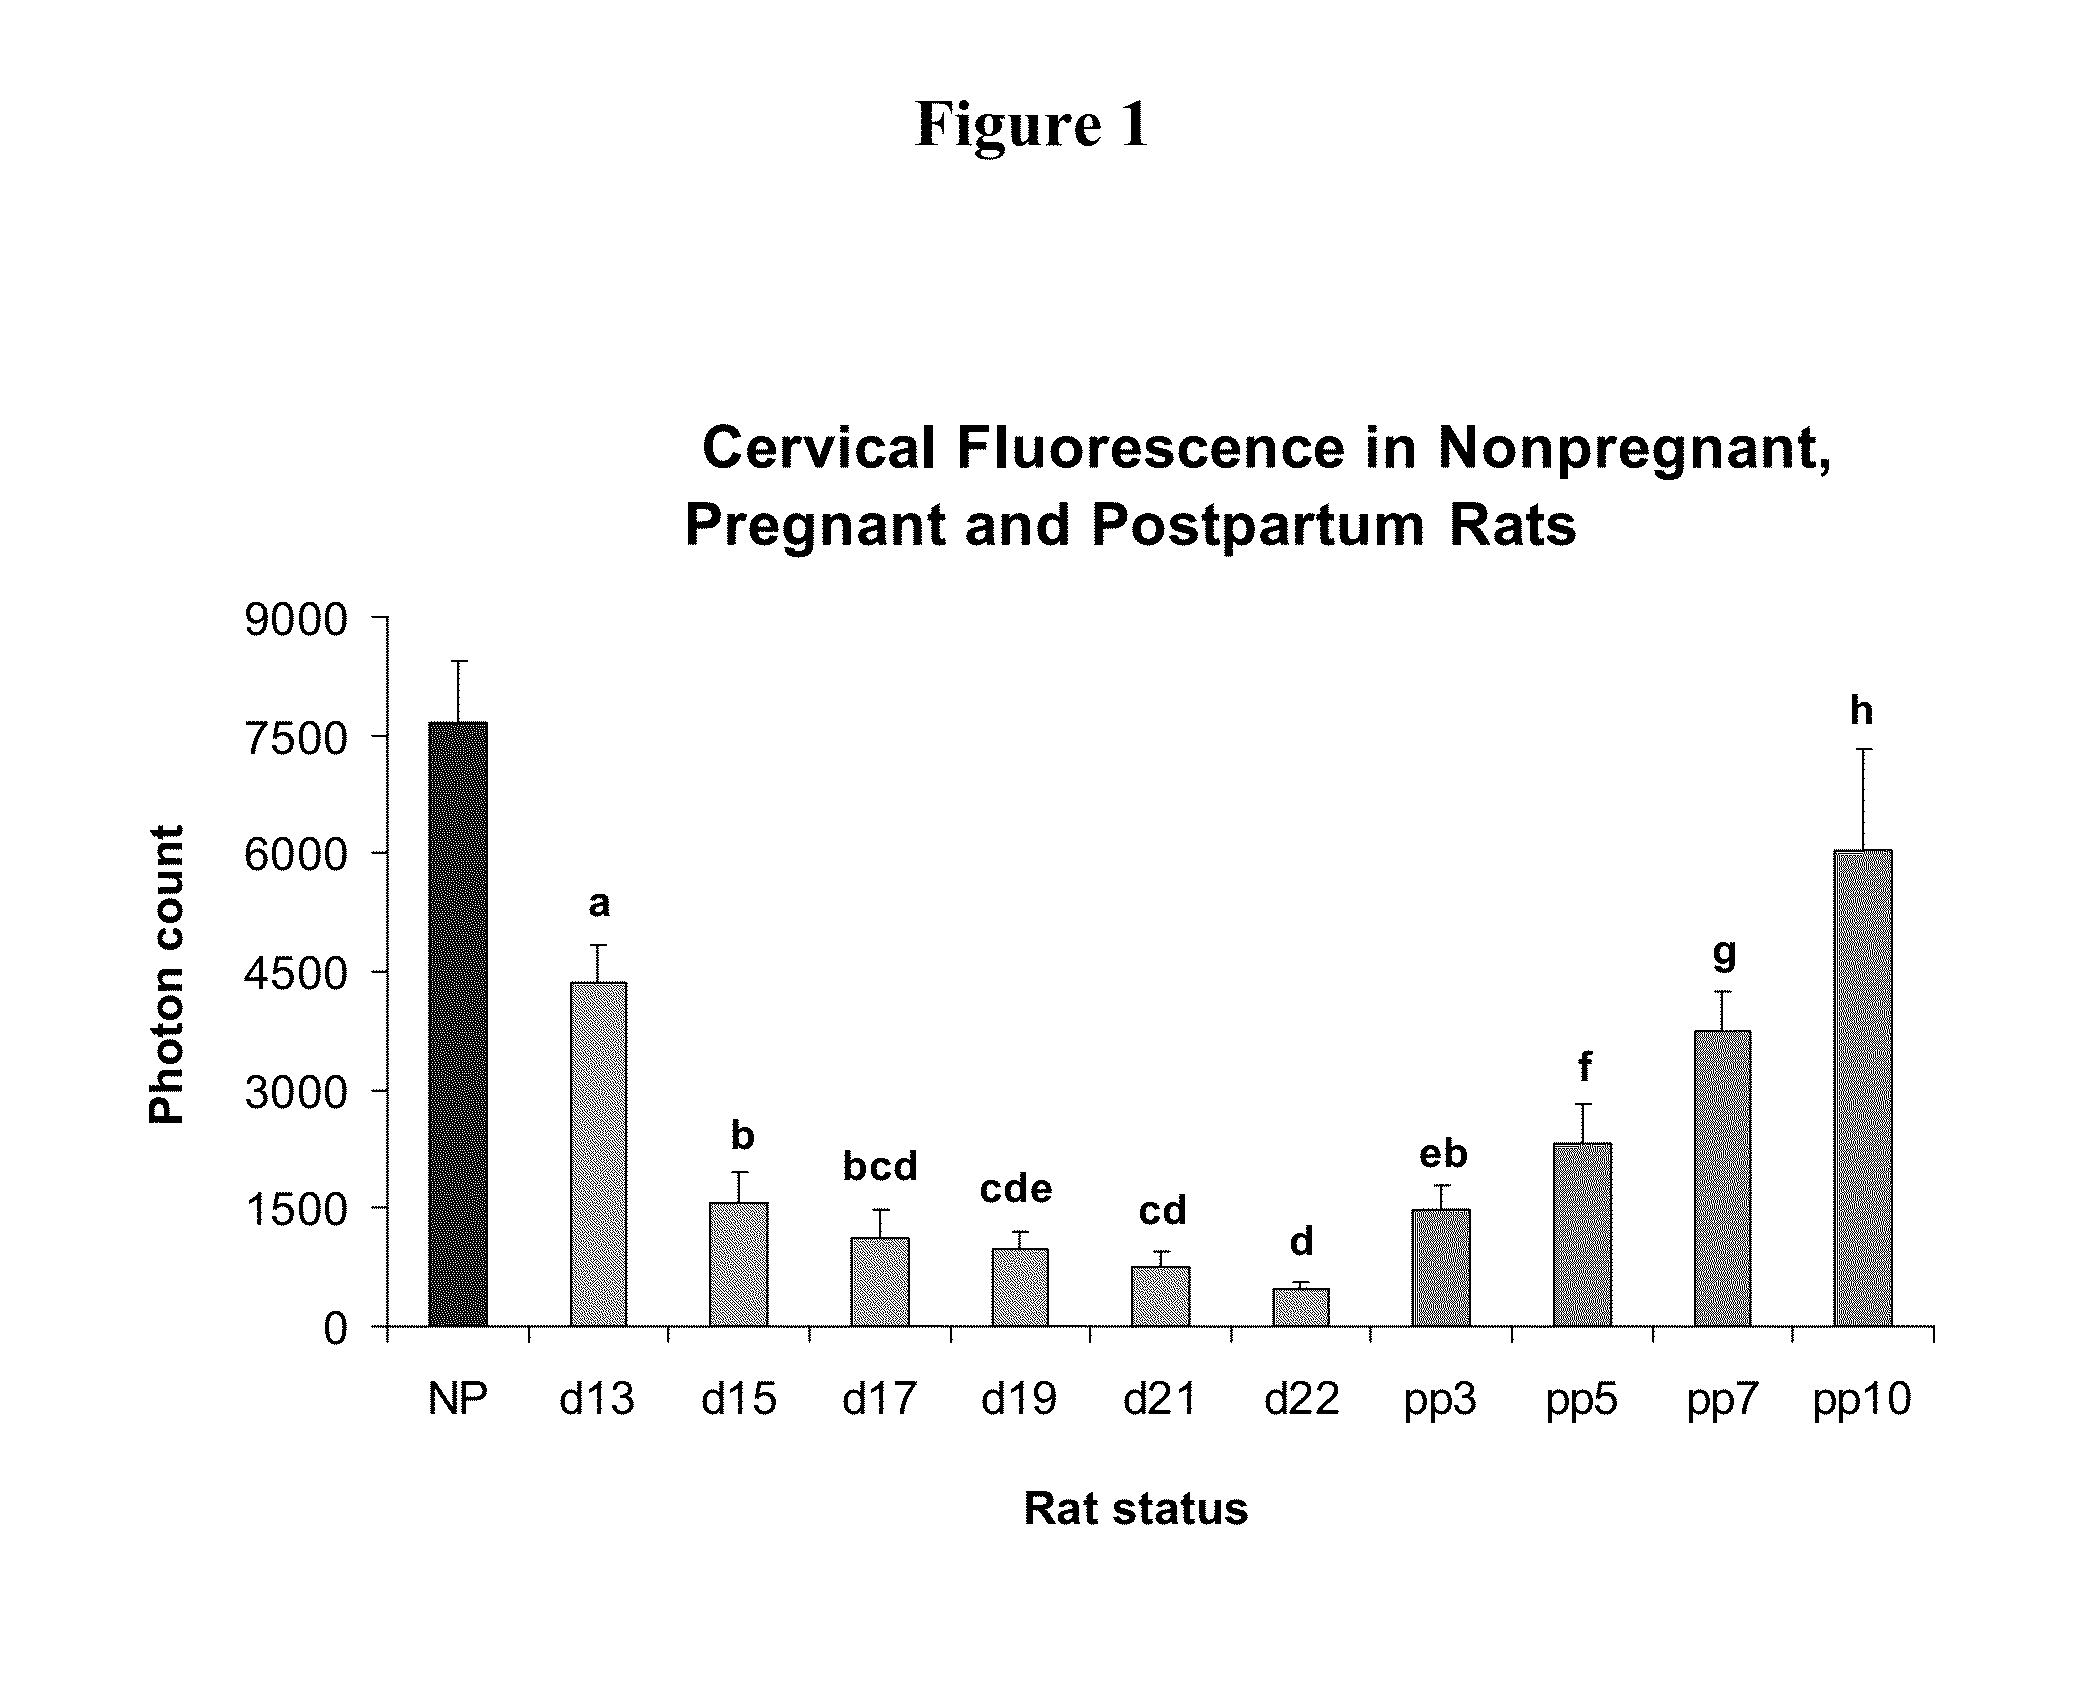 Methods for inhibiting preterm labor and uterine contractility disorders and preventing cervical ripening